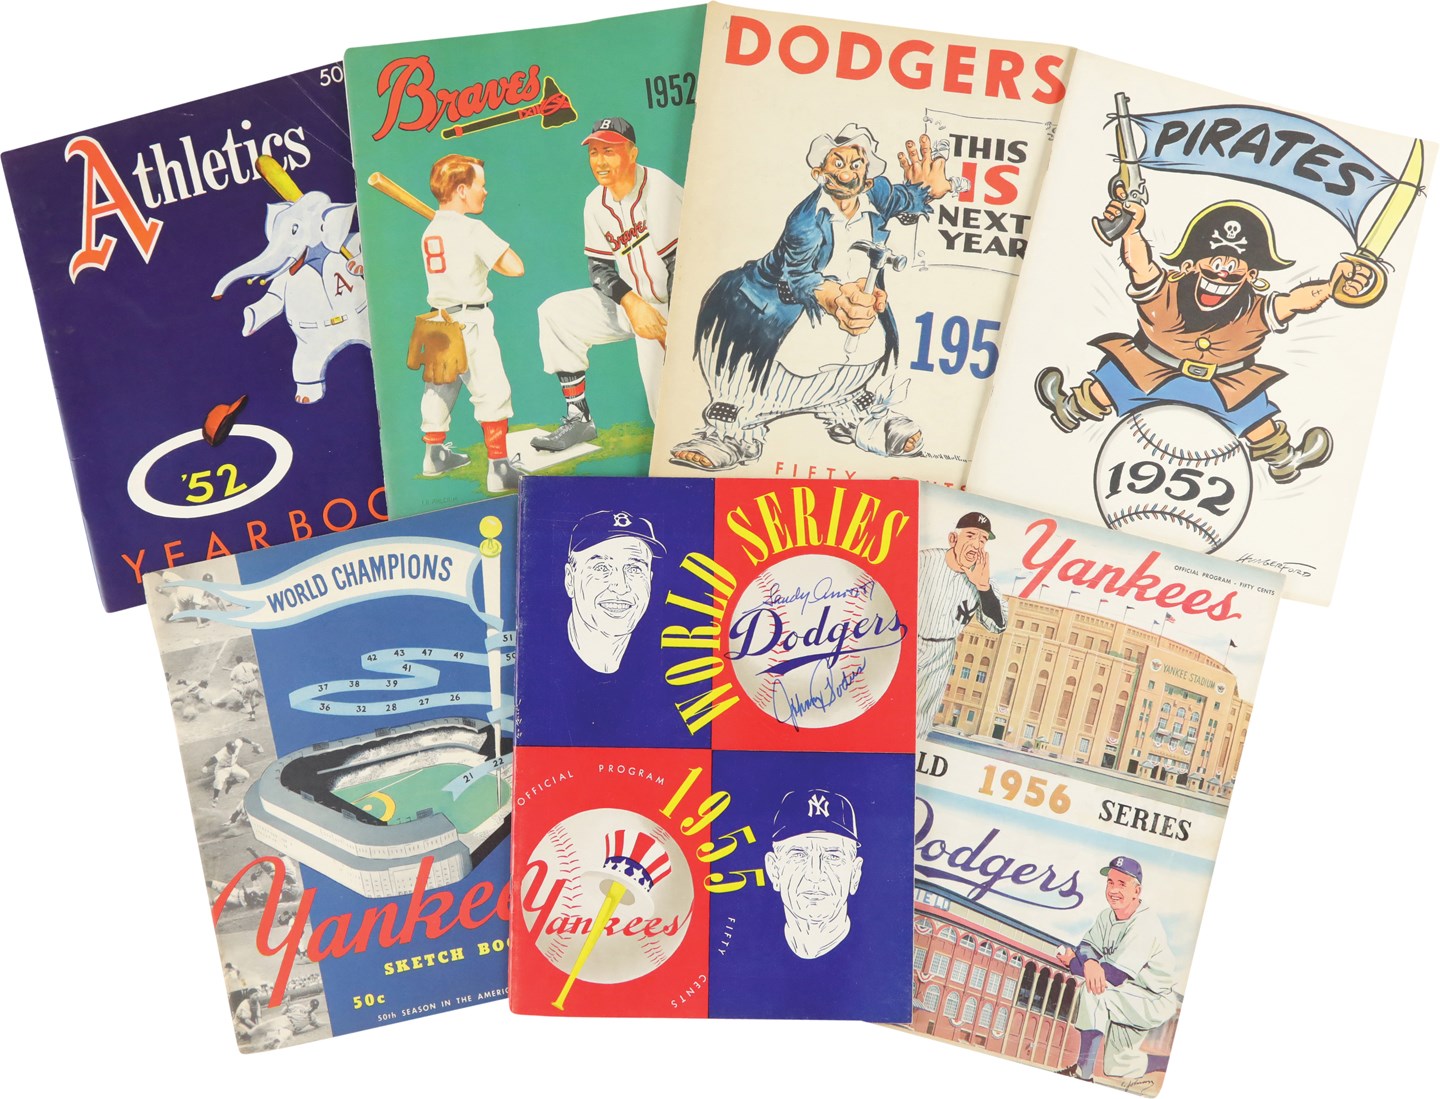 World Series Programs & Yearbook Collection (7)